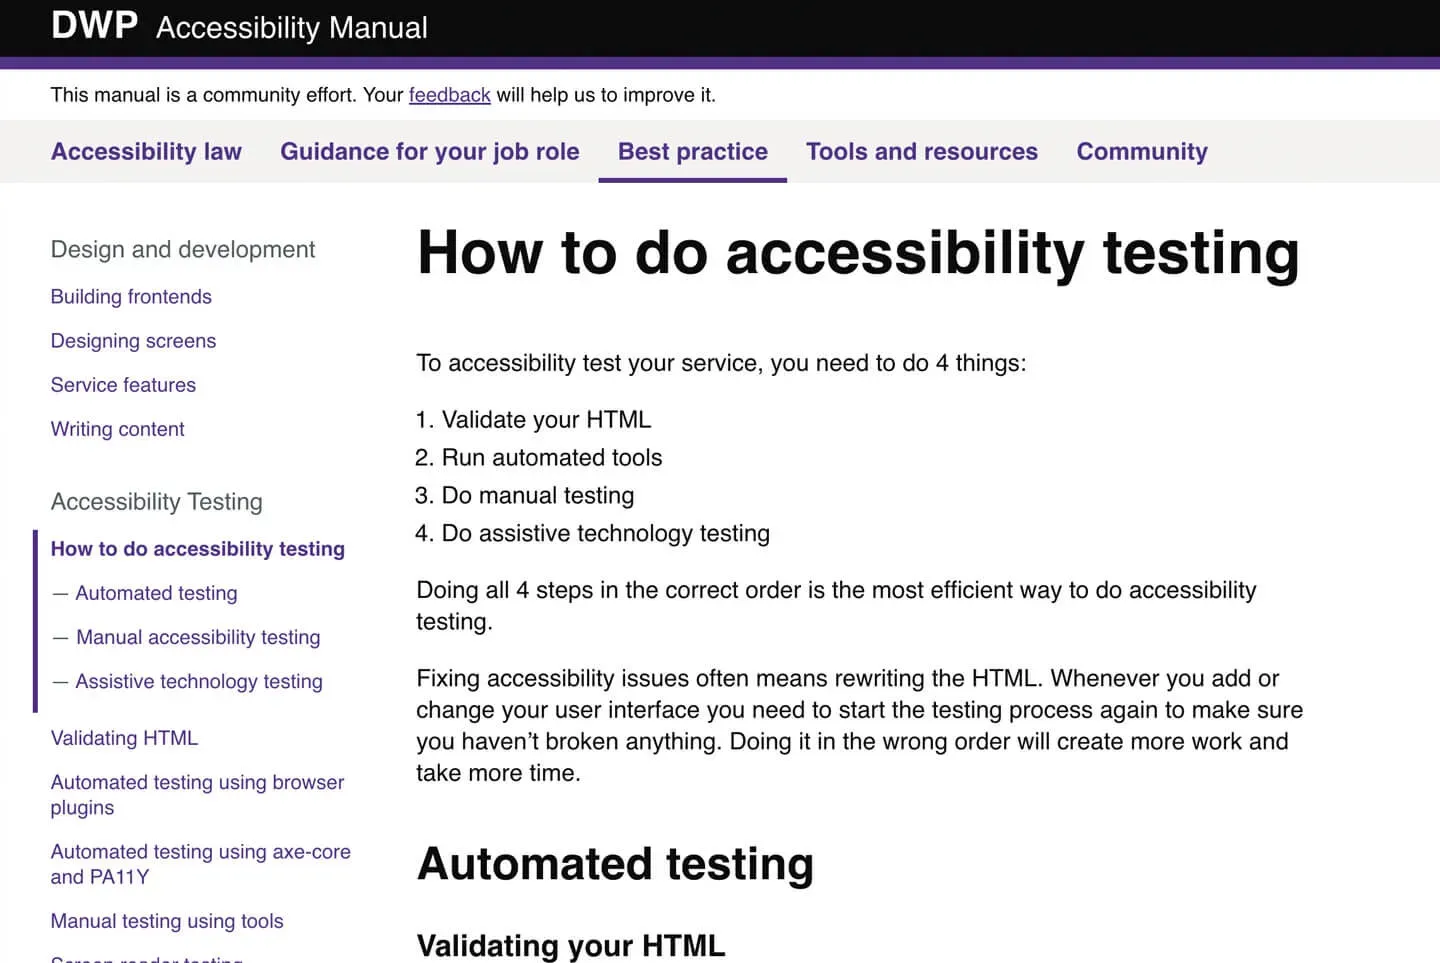 The best practice section in the accessibility manual. It shows the screen for how to do accessibility testing.